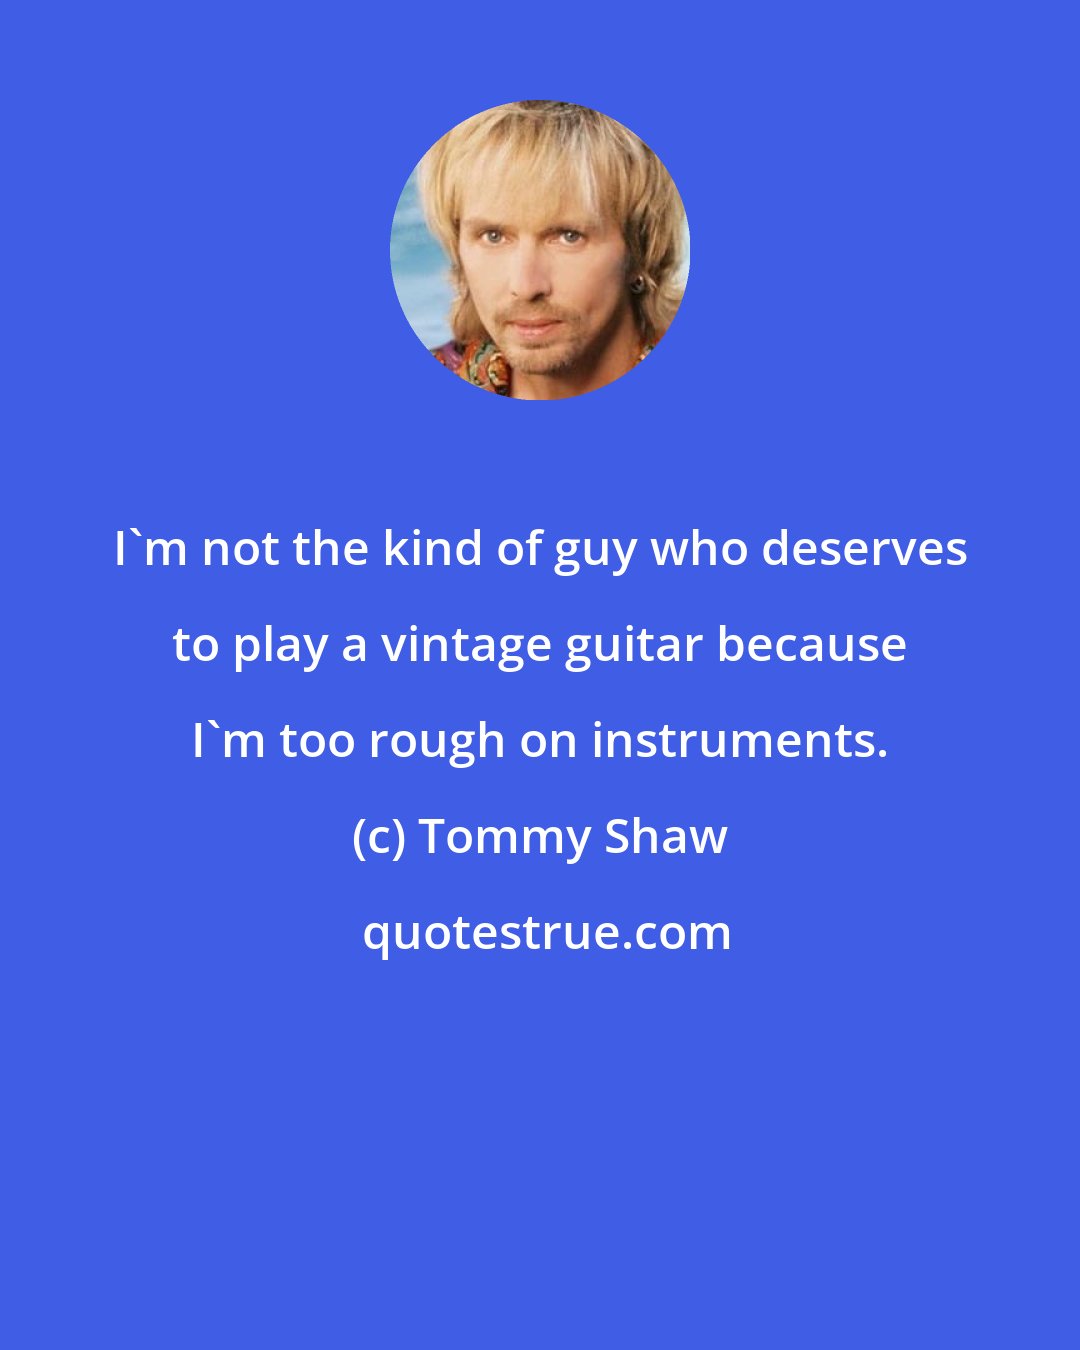 Tommy Shaw: I'm not the kind of guy who deserves to play a vintage guitar because I'm too rough on instruments.